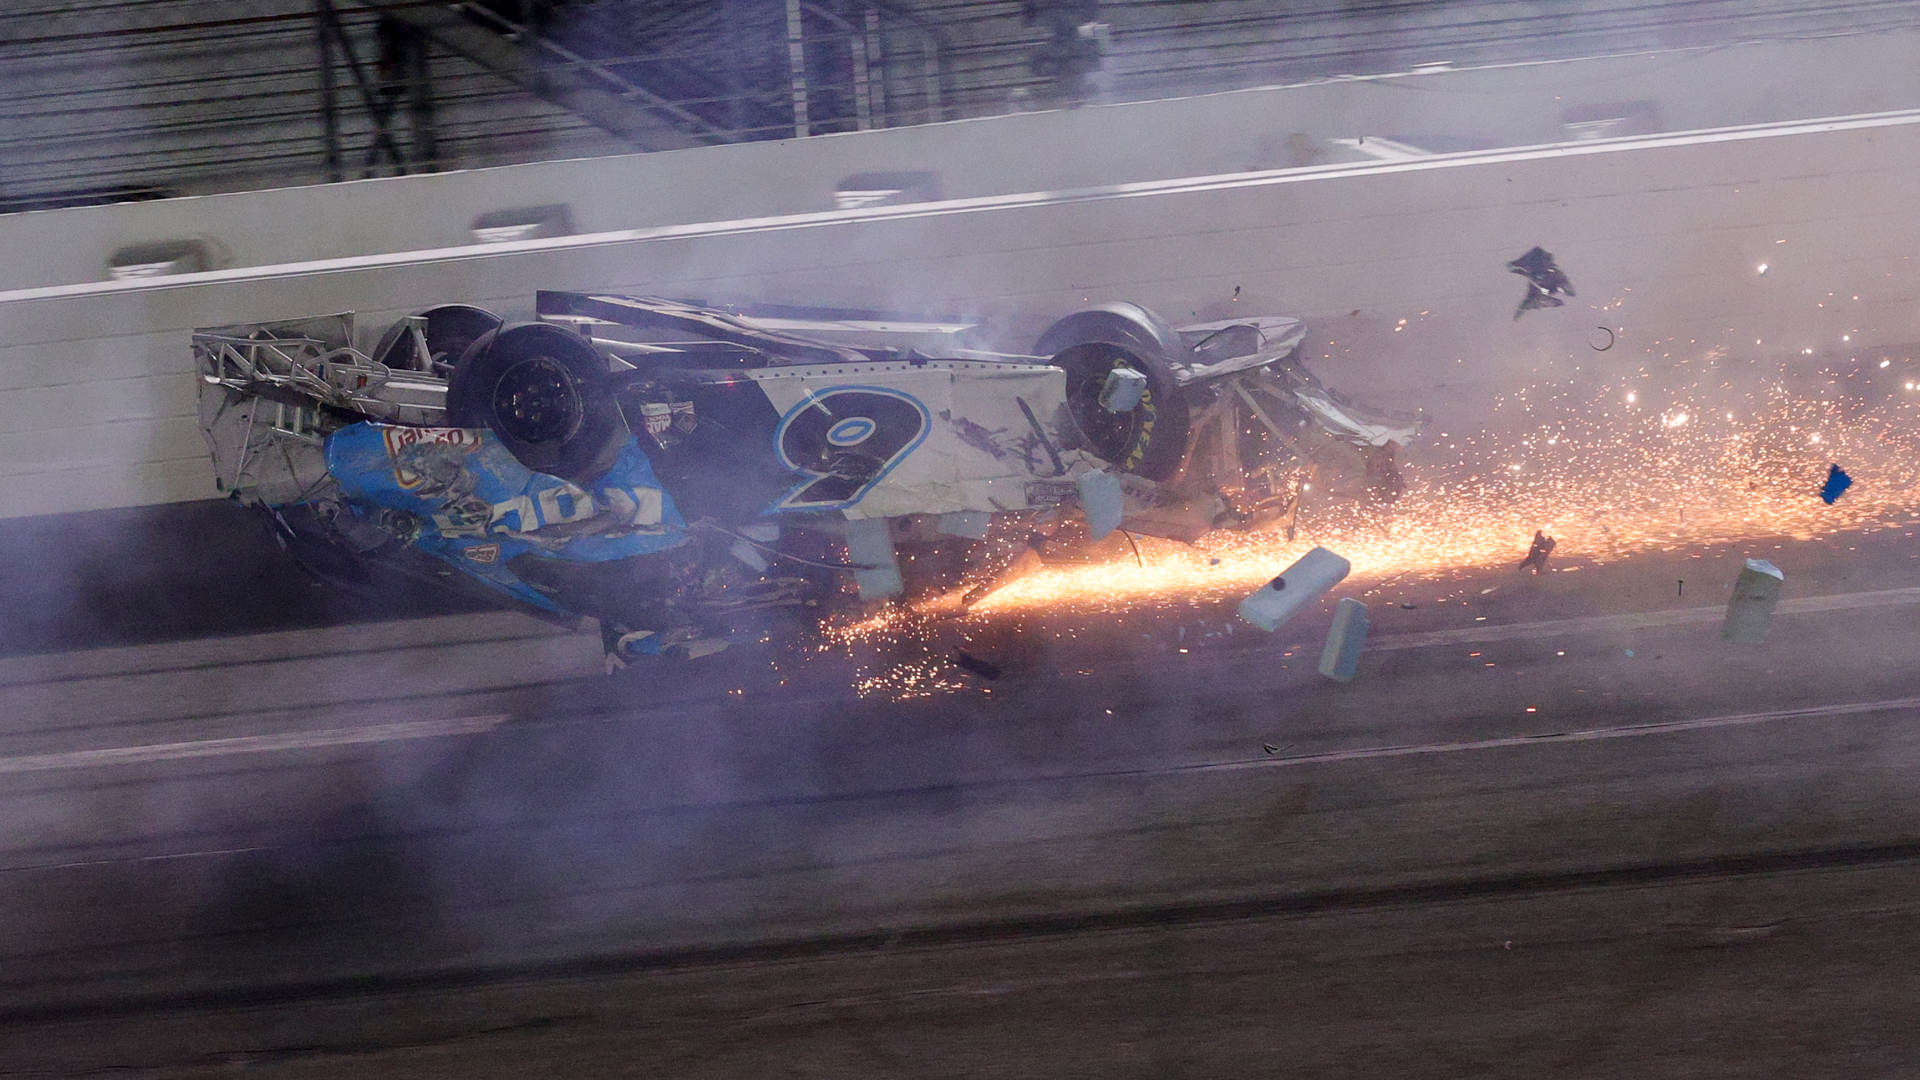 Roush Fenway Racing driver Ryan Newman is in a serious condition after his crash at the Daytona 500.